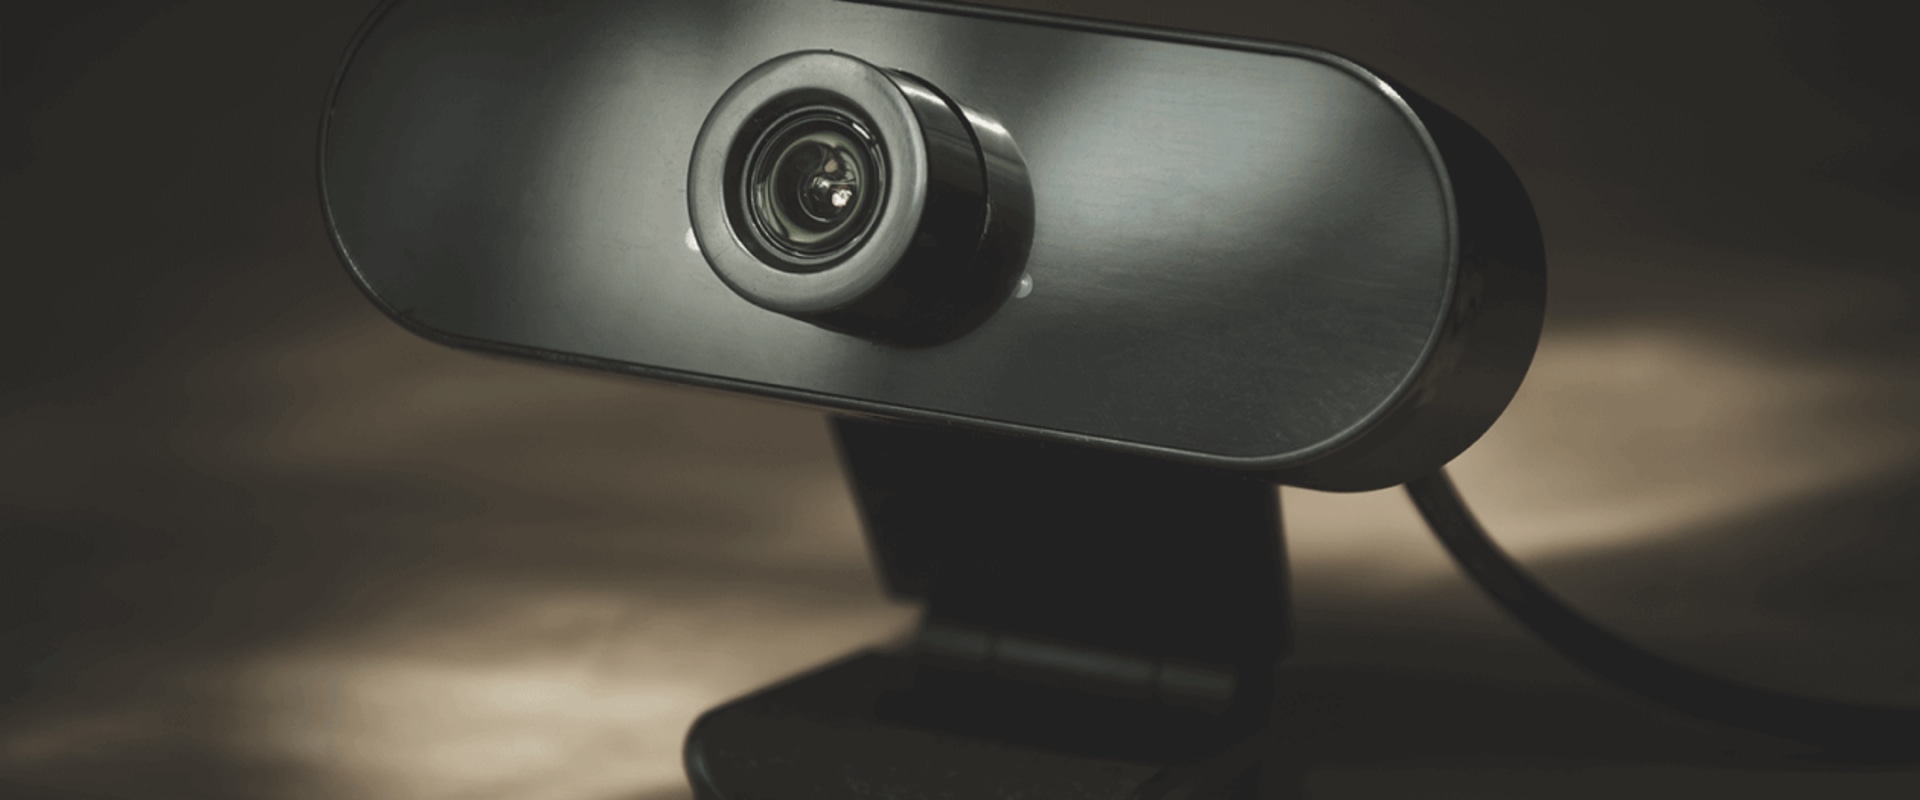 Connecting a Webcam to Your Computer: A Step-by-Step Guide